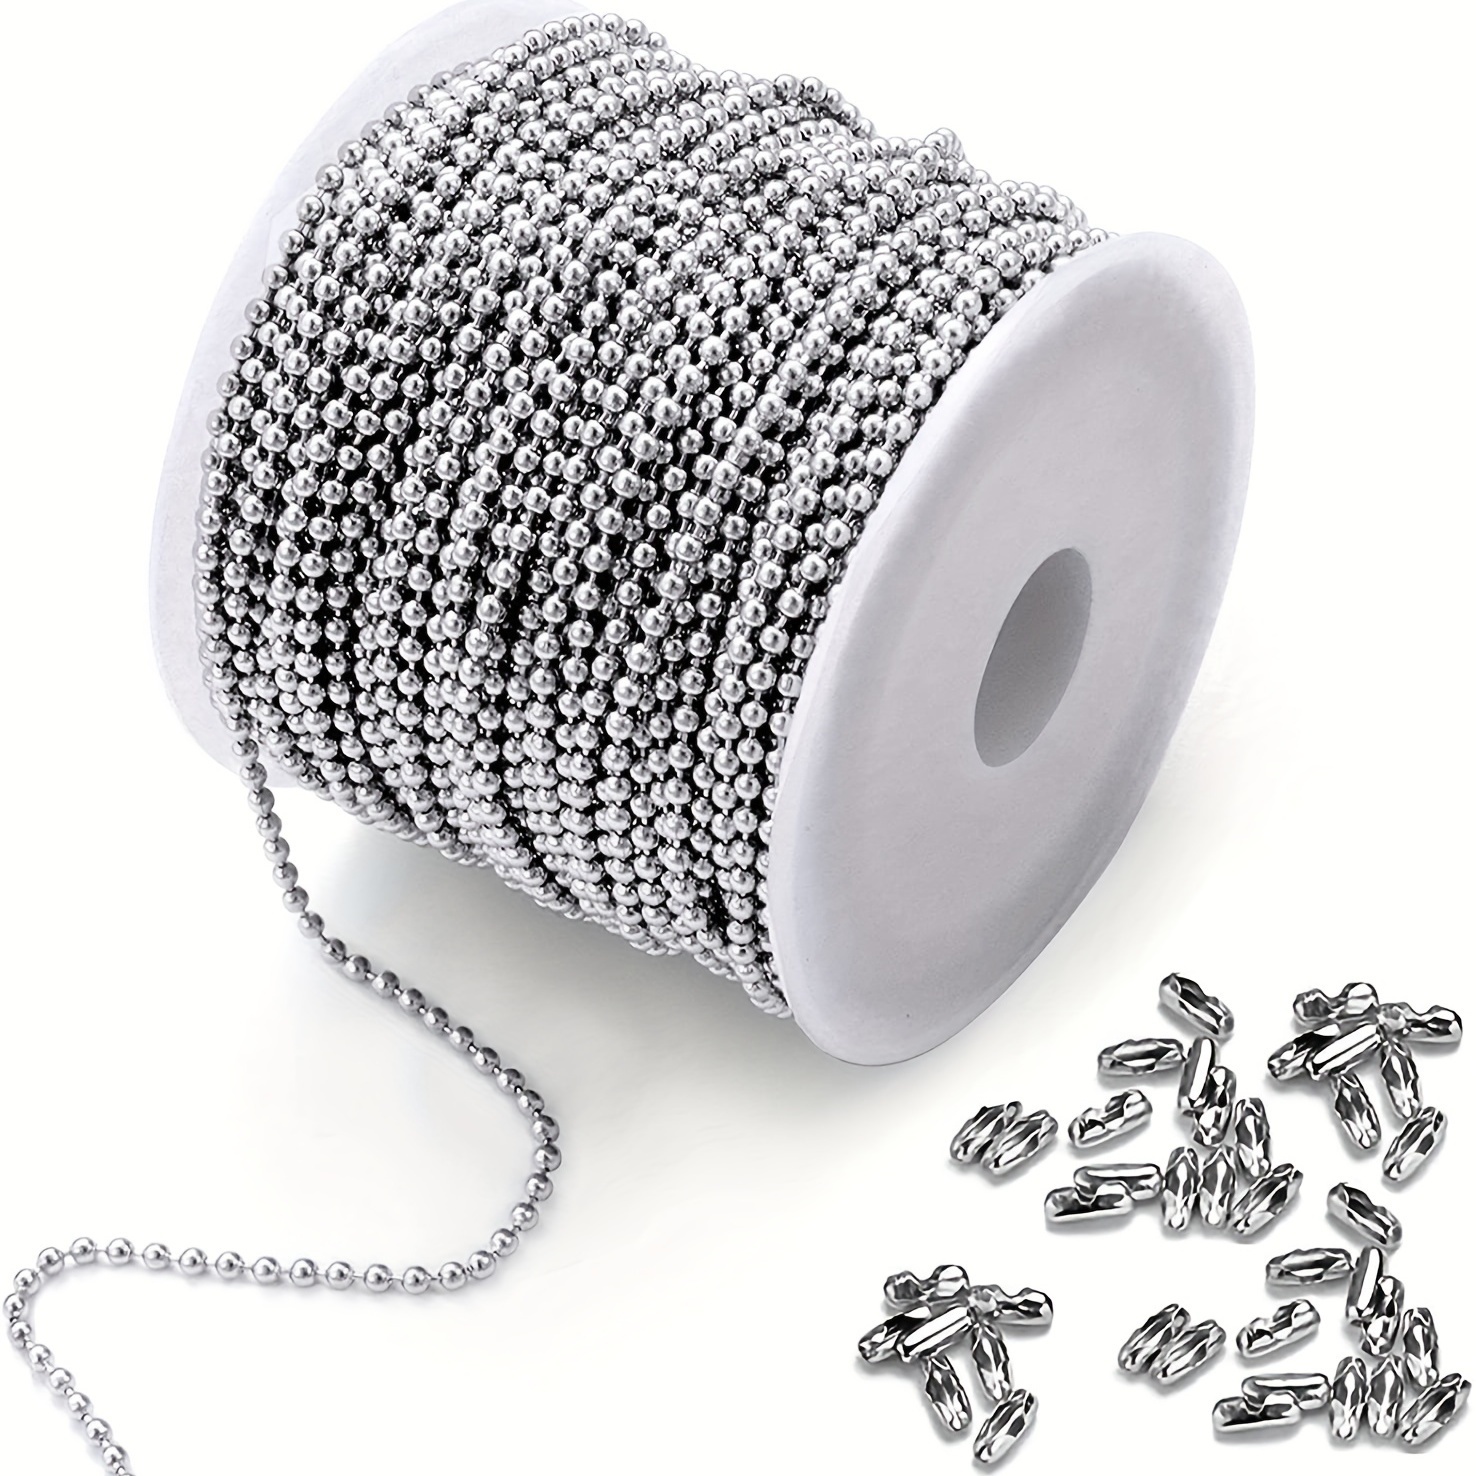 Ball Bead Chain Stainless Steel 33ft Beaded Chain Necklace Chains For  Jewelry Making Diy With 200pcs Matching 2.4mm Bead Connector Clasps